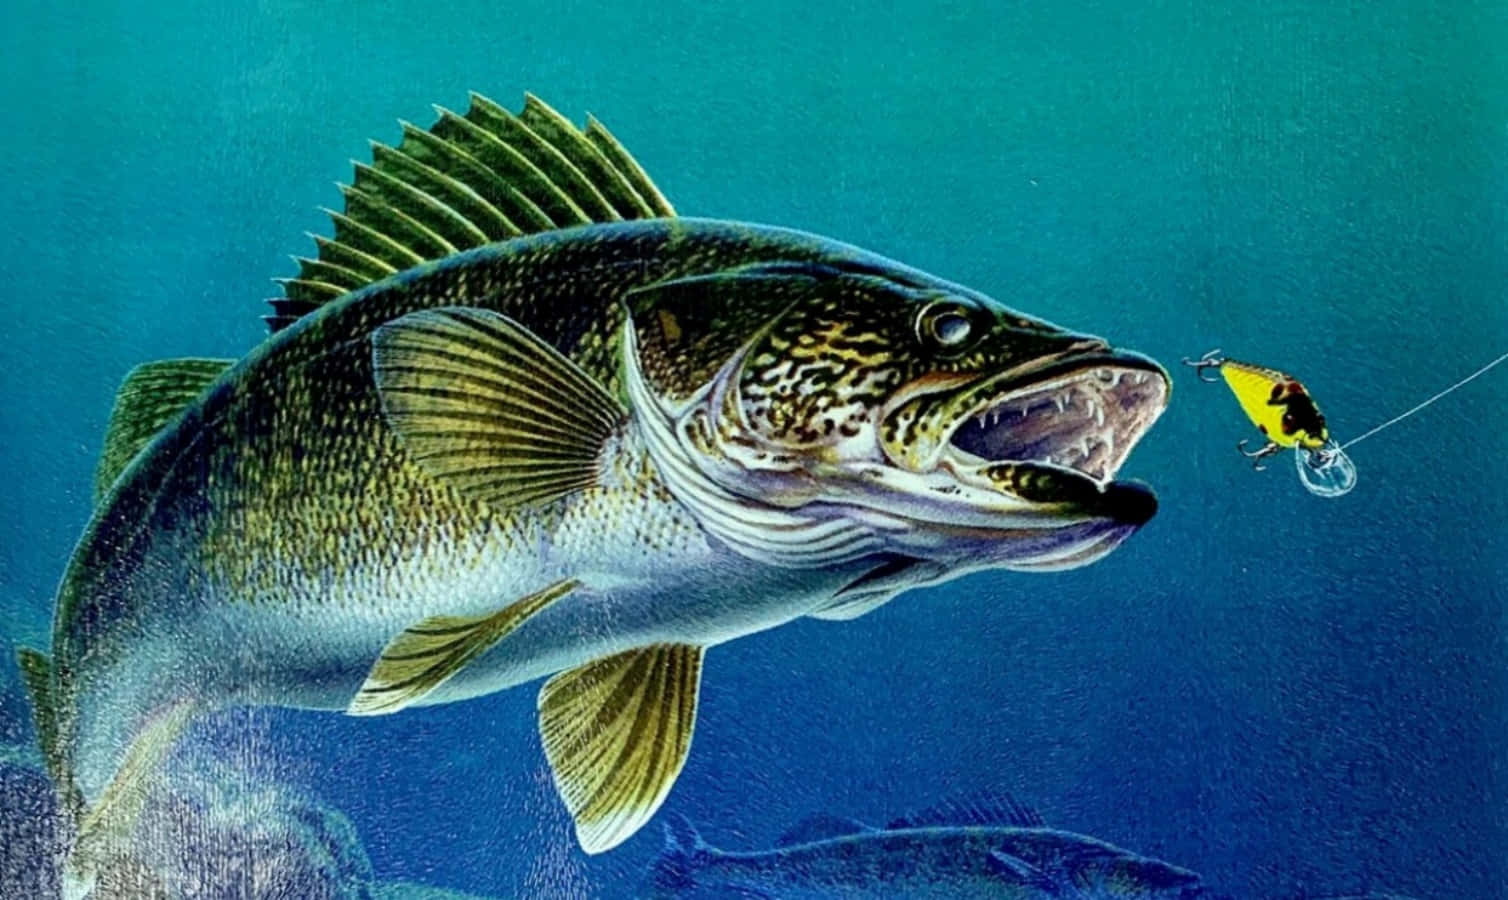 A Painting Of A Large Fish With A Hook